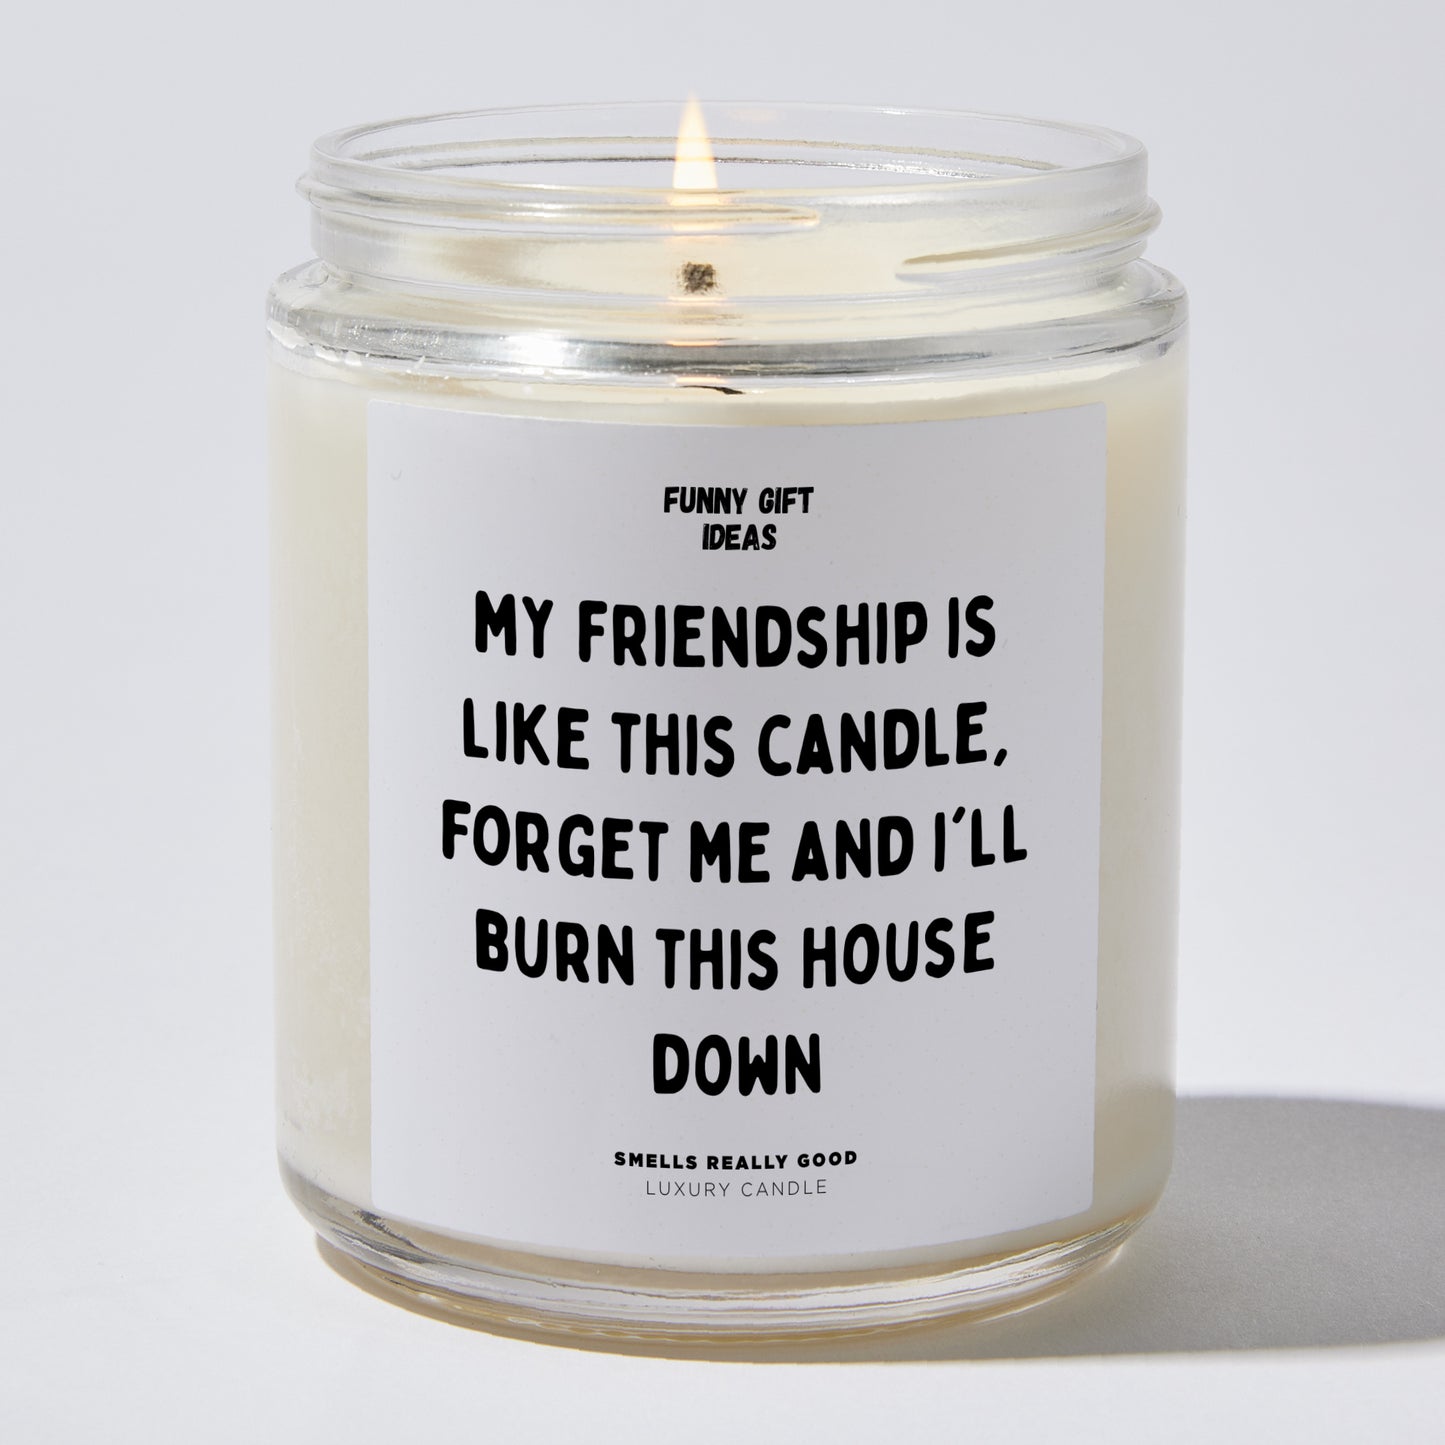 Fun Gift for Friends - My Friendship Is Like This Candle! Forget Me And I'll Burn This House Down - Candle